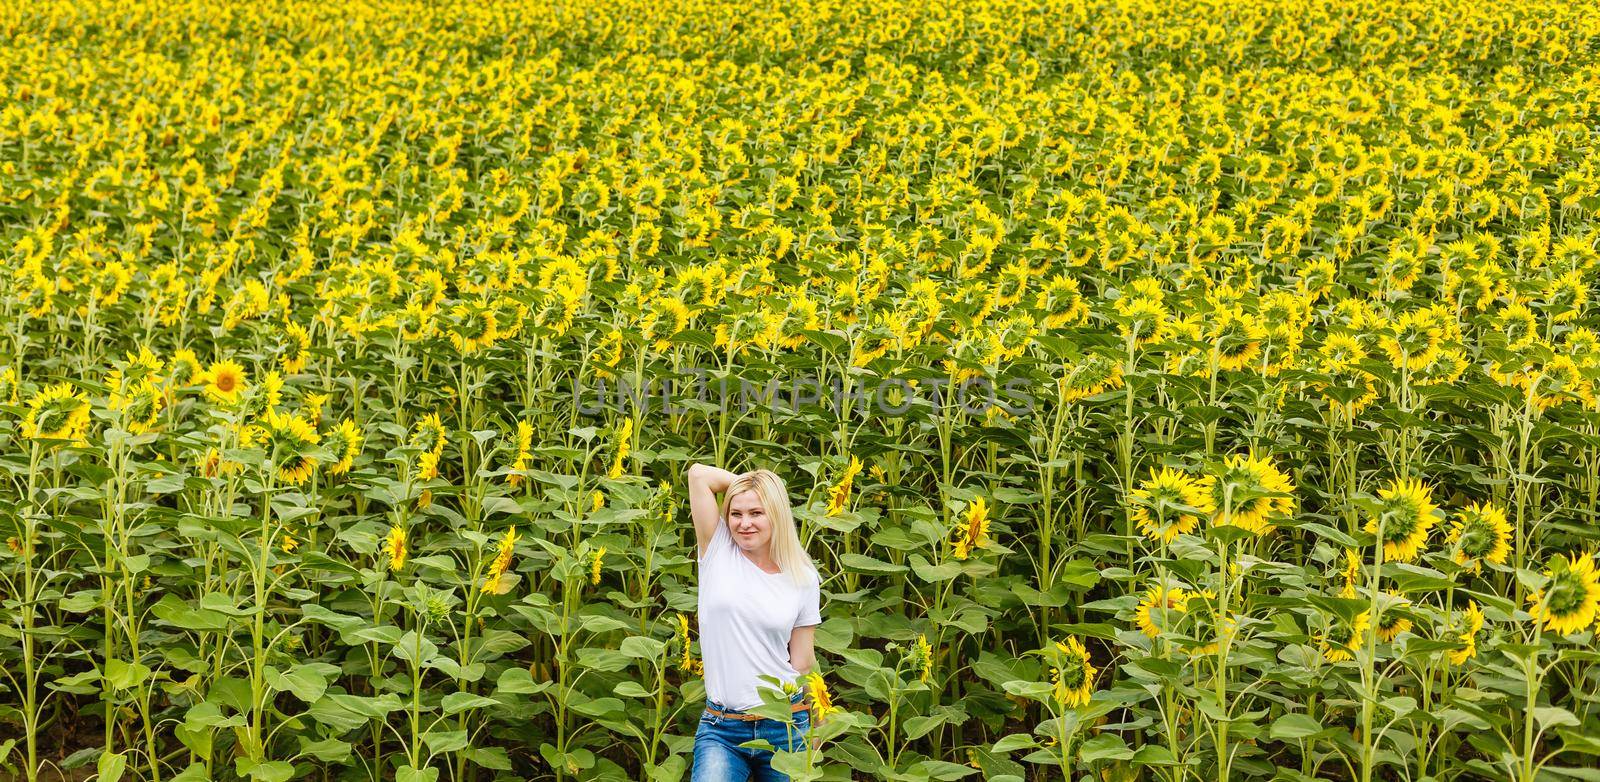 young beautiful woman between sunflowers by Andelov13